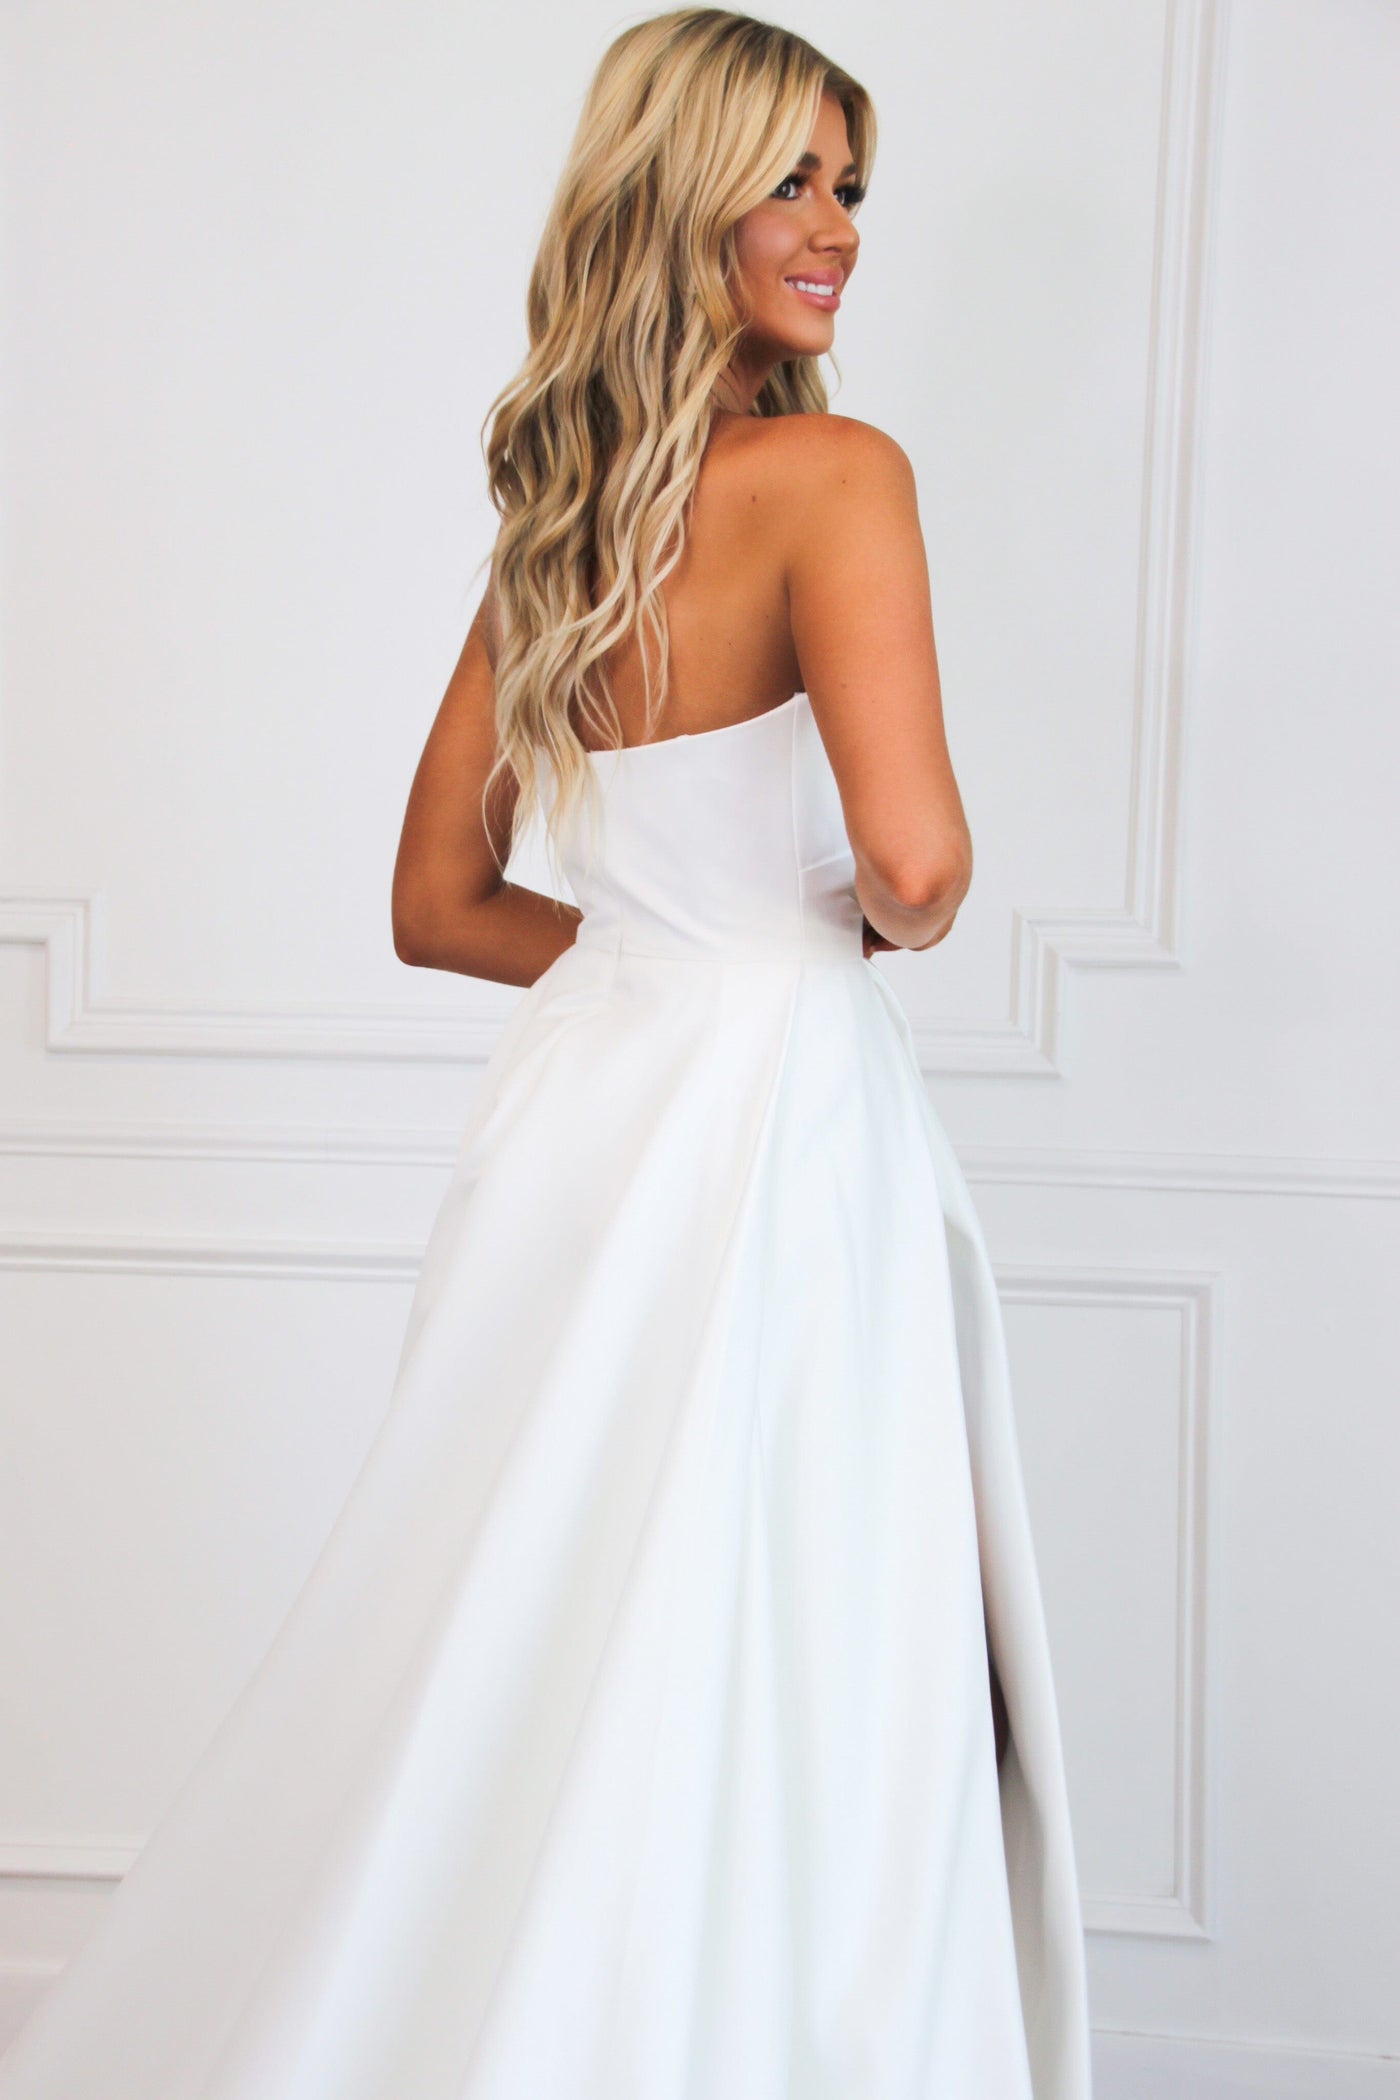 Royal Affair Strapless Slit Ball Gown Wedding Dress: White - Bella and Bloom Boutique